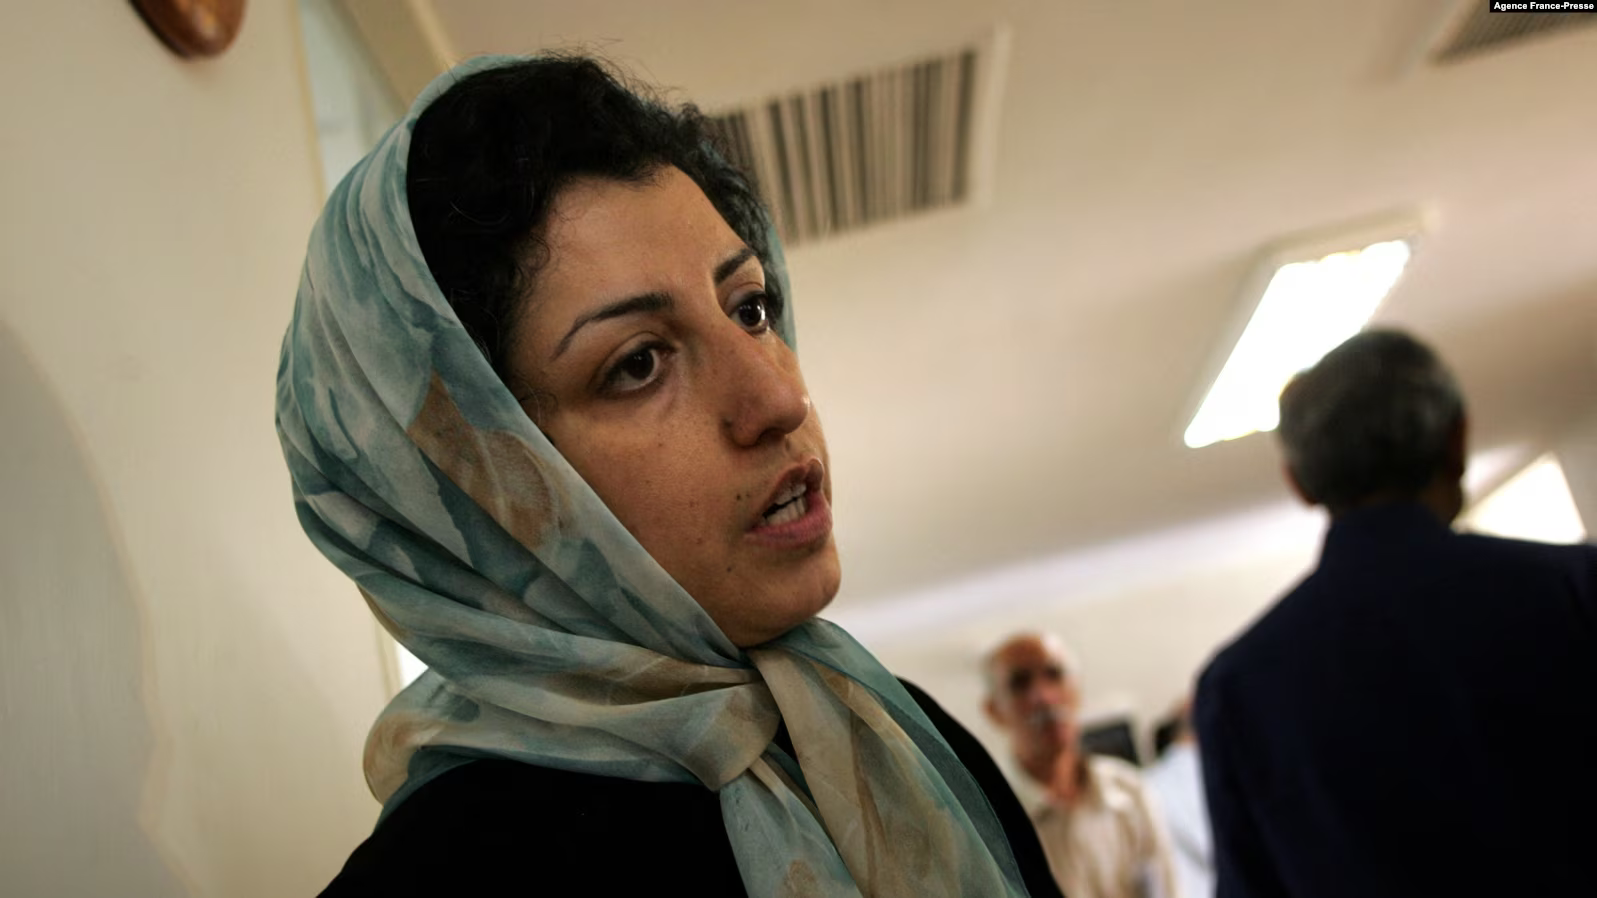 Jailed Iranian Nobel Peace Prize Winner to Stand Trial